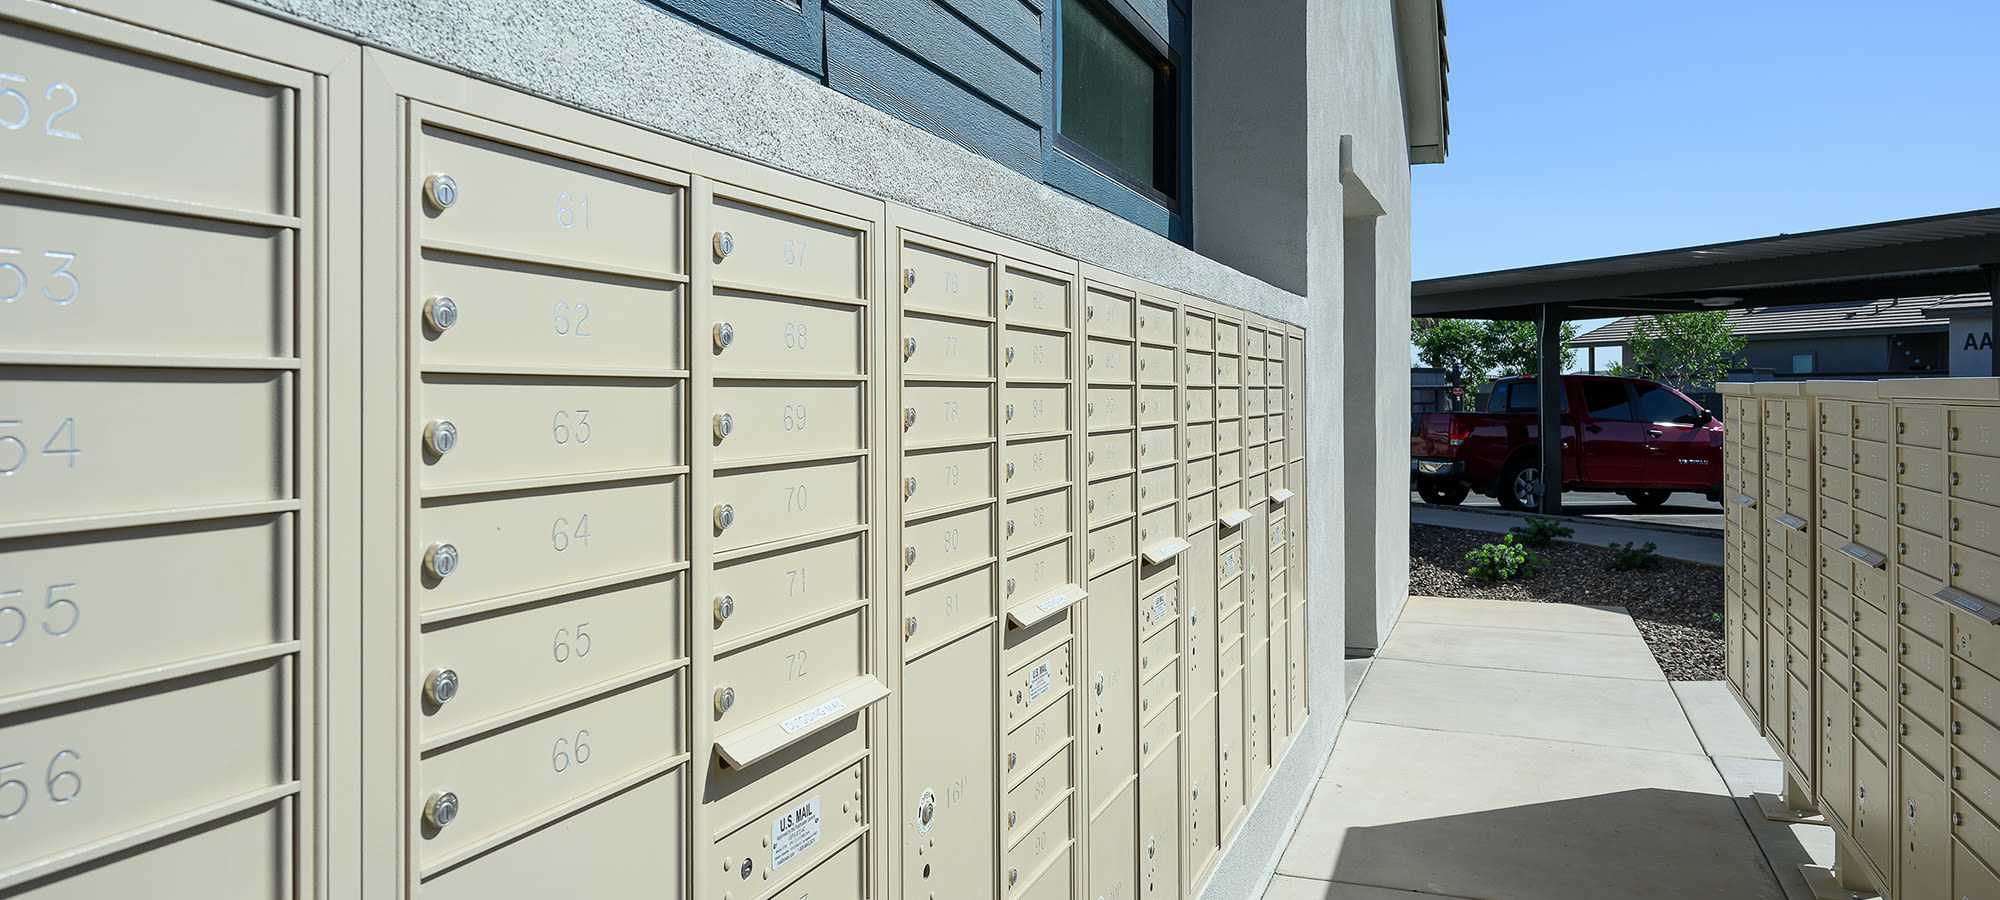 Mail boxes at FirstStreet Ballpark Village in Goodyear, Arizona